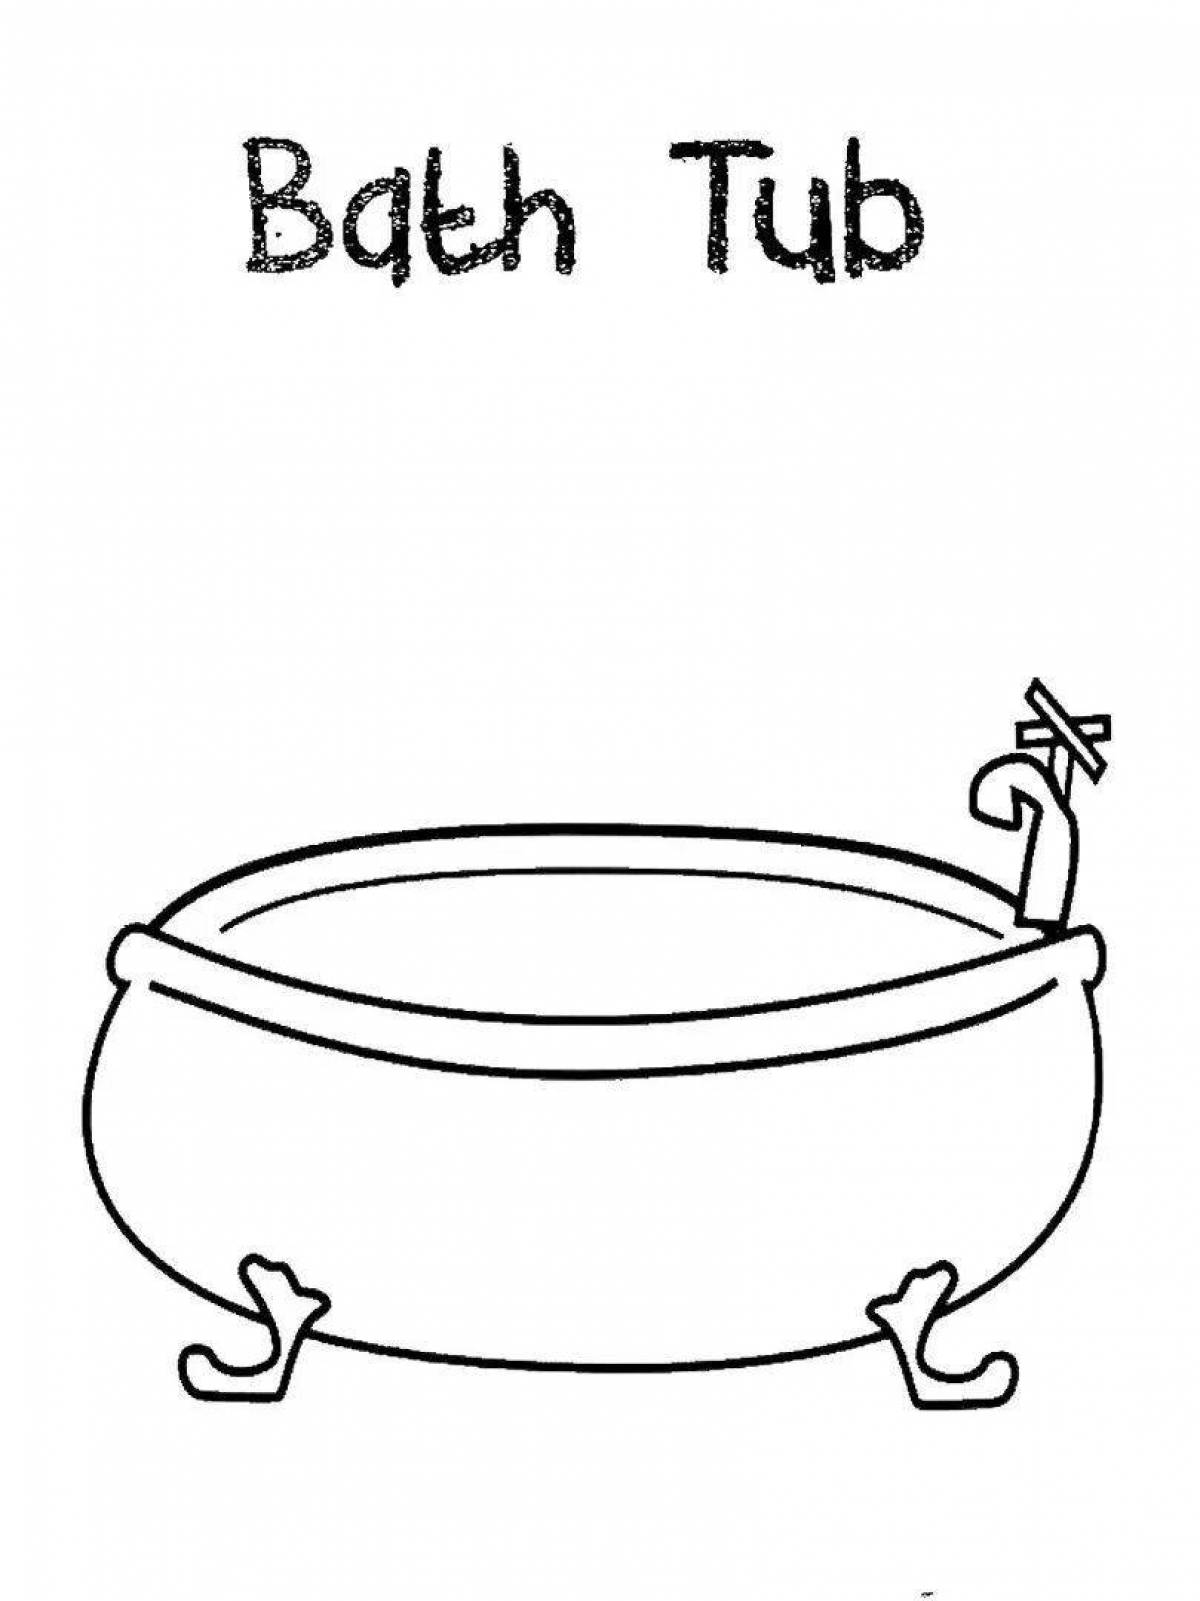 Amazing bath coloring book for kids